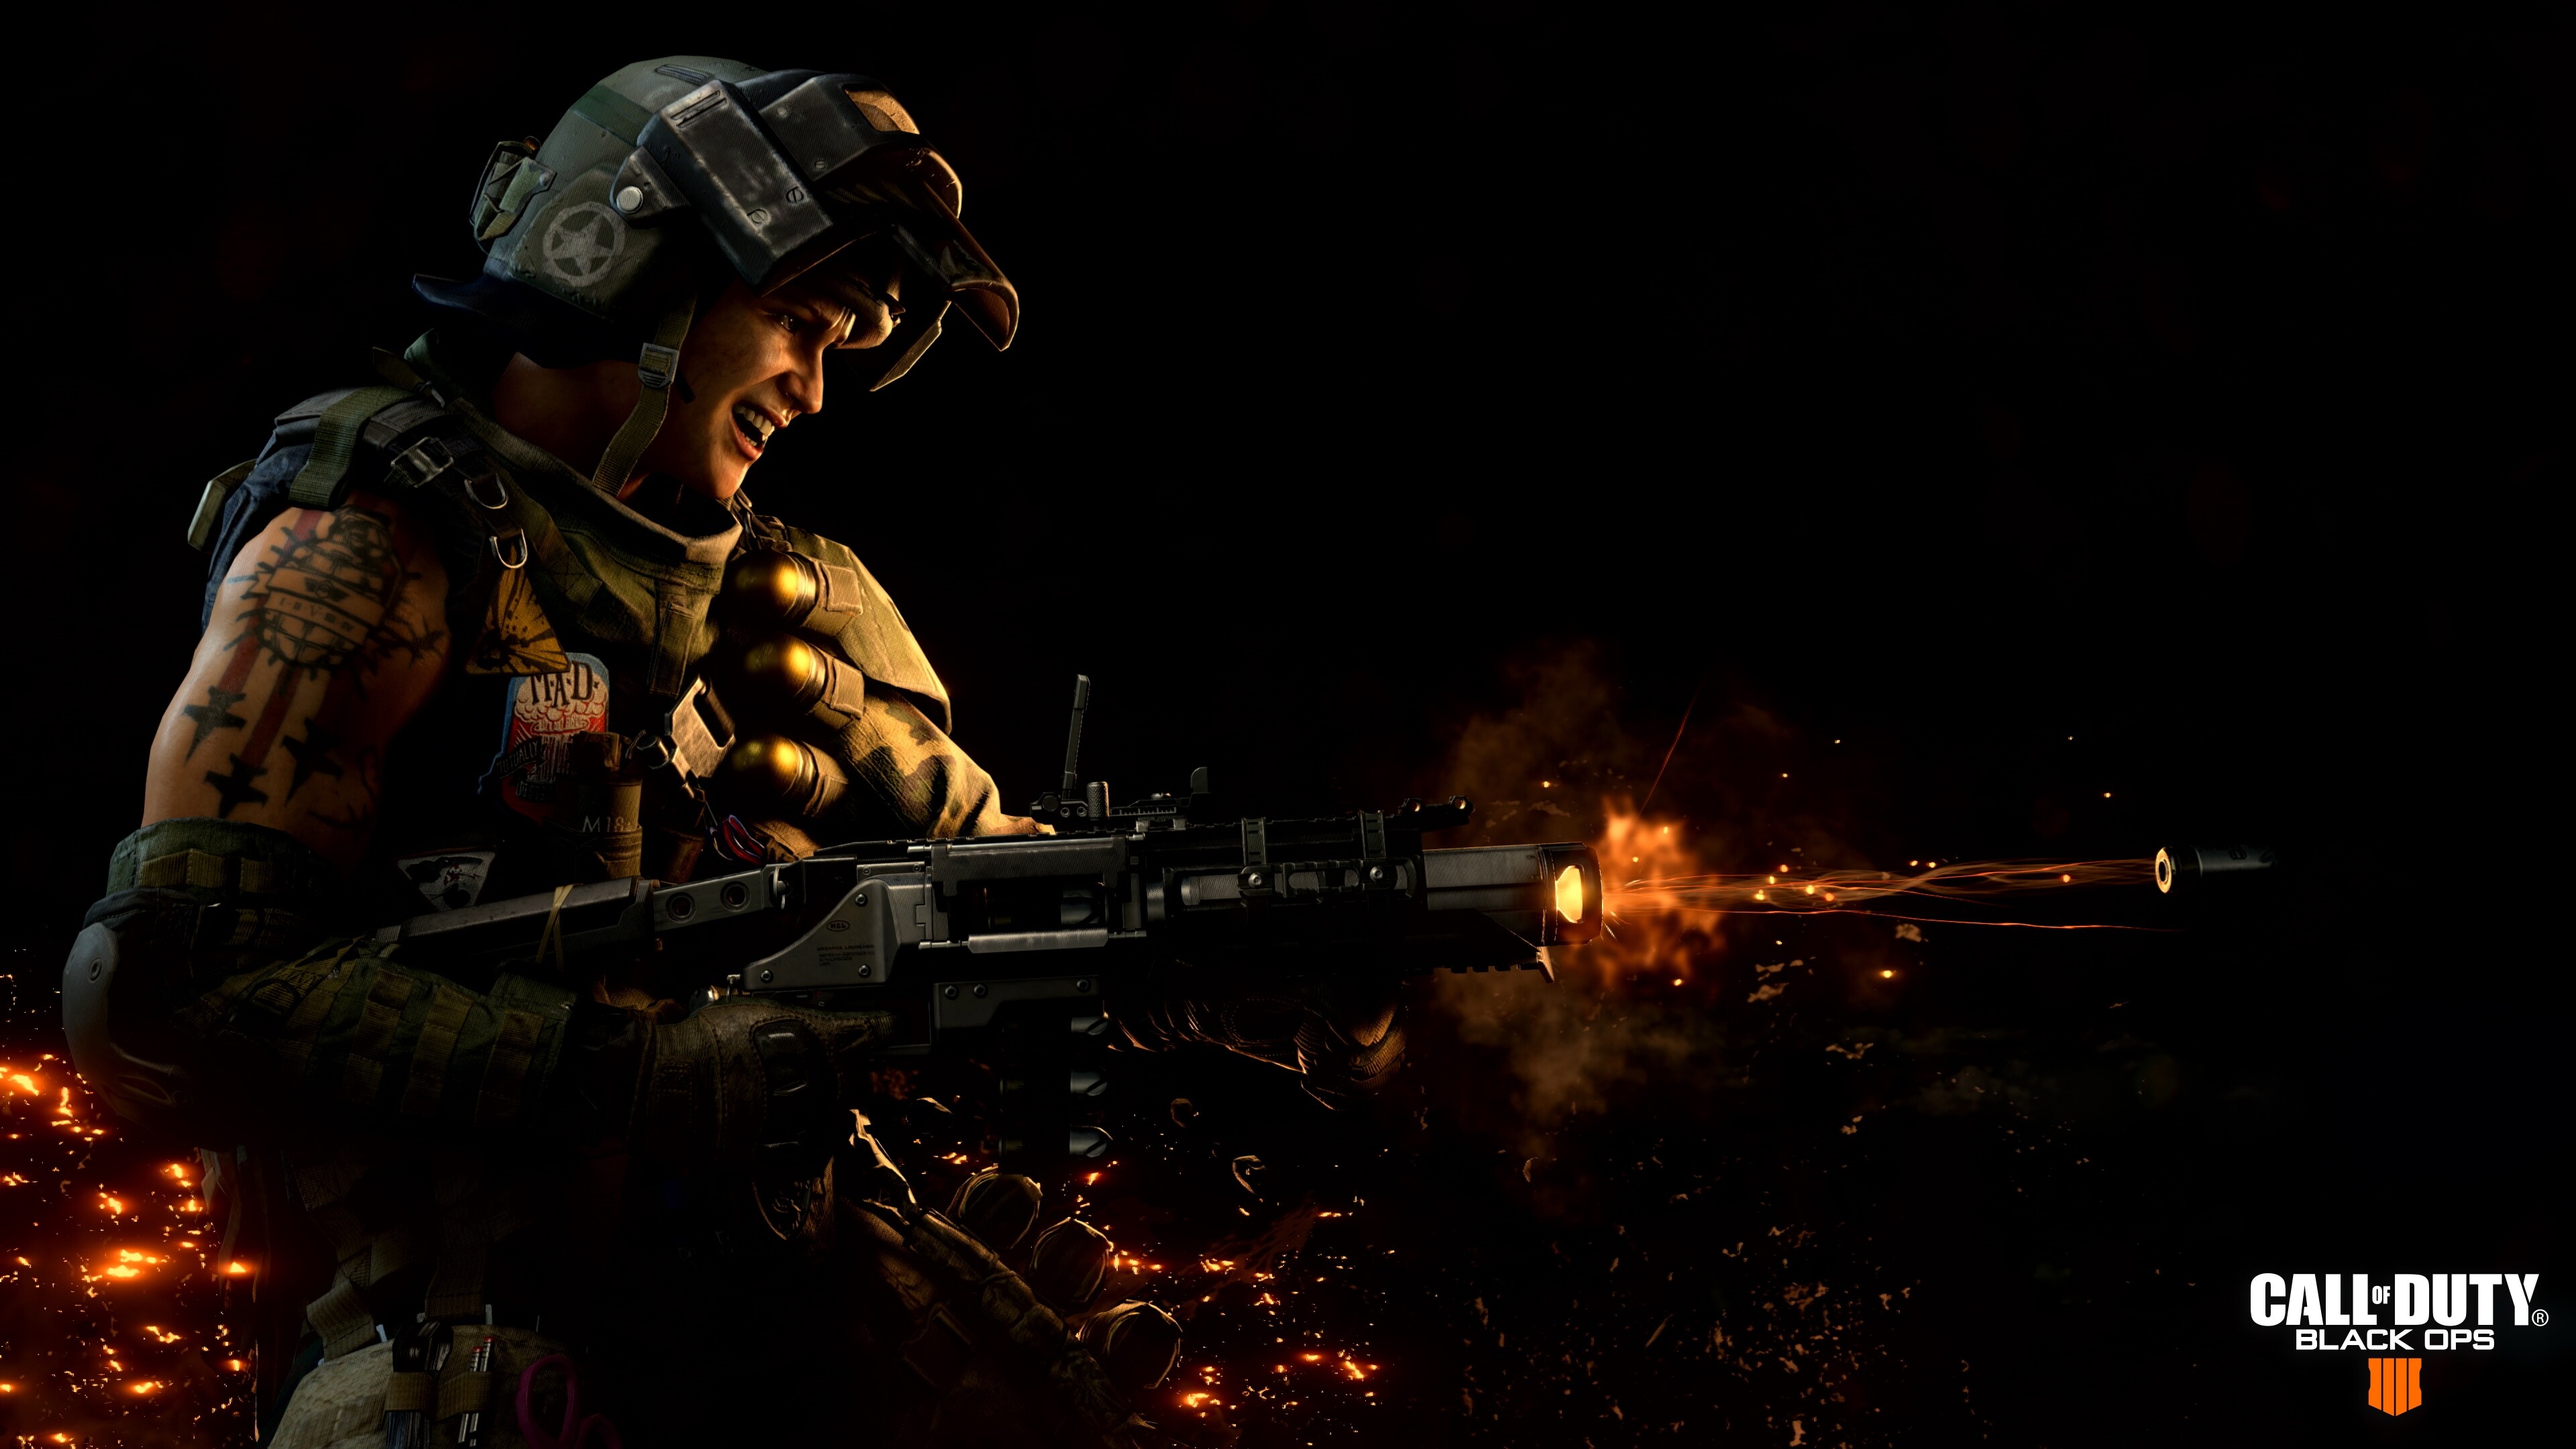 Call of Duty: Black Ops, The seventh installment in the series. 3840x2160 4K Wallpaper.